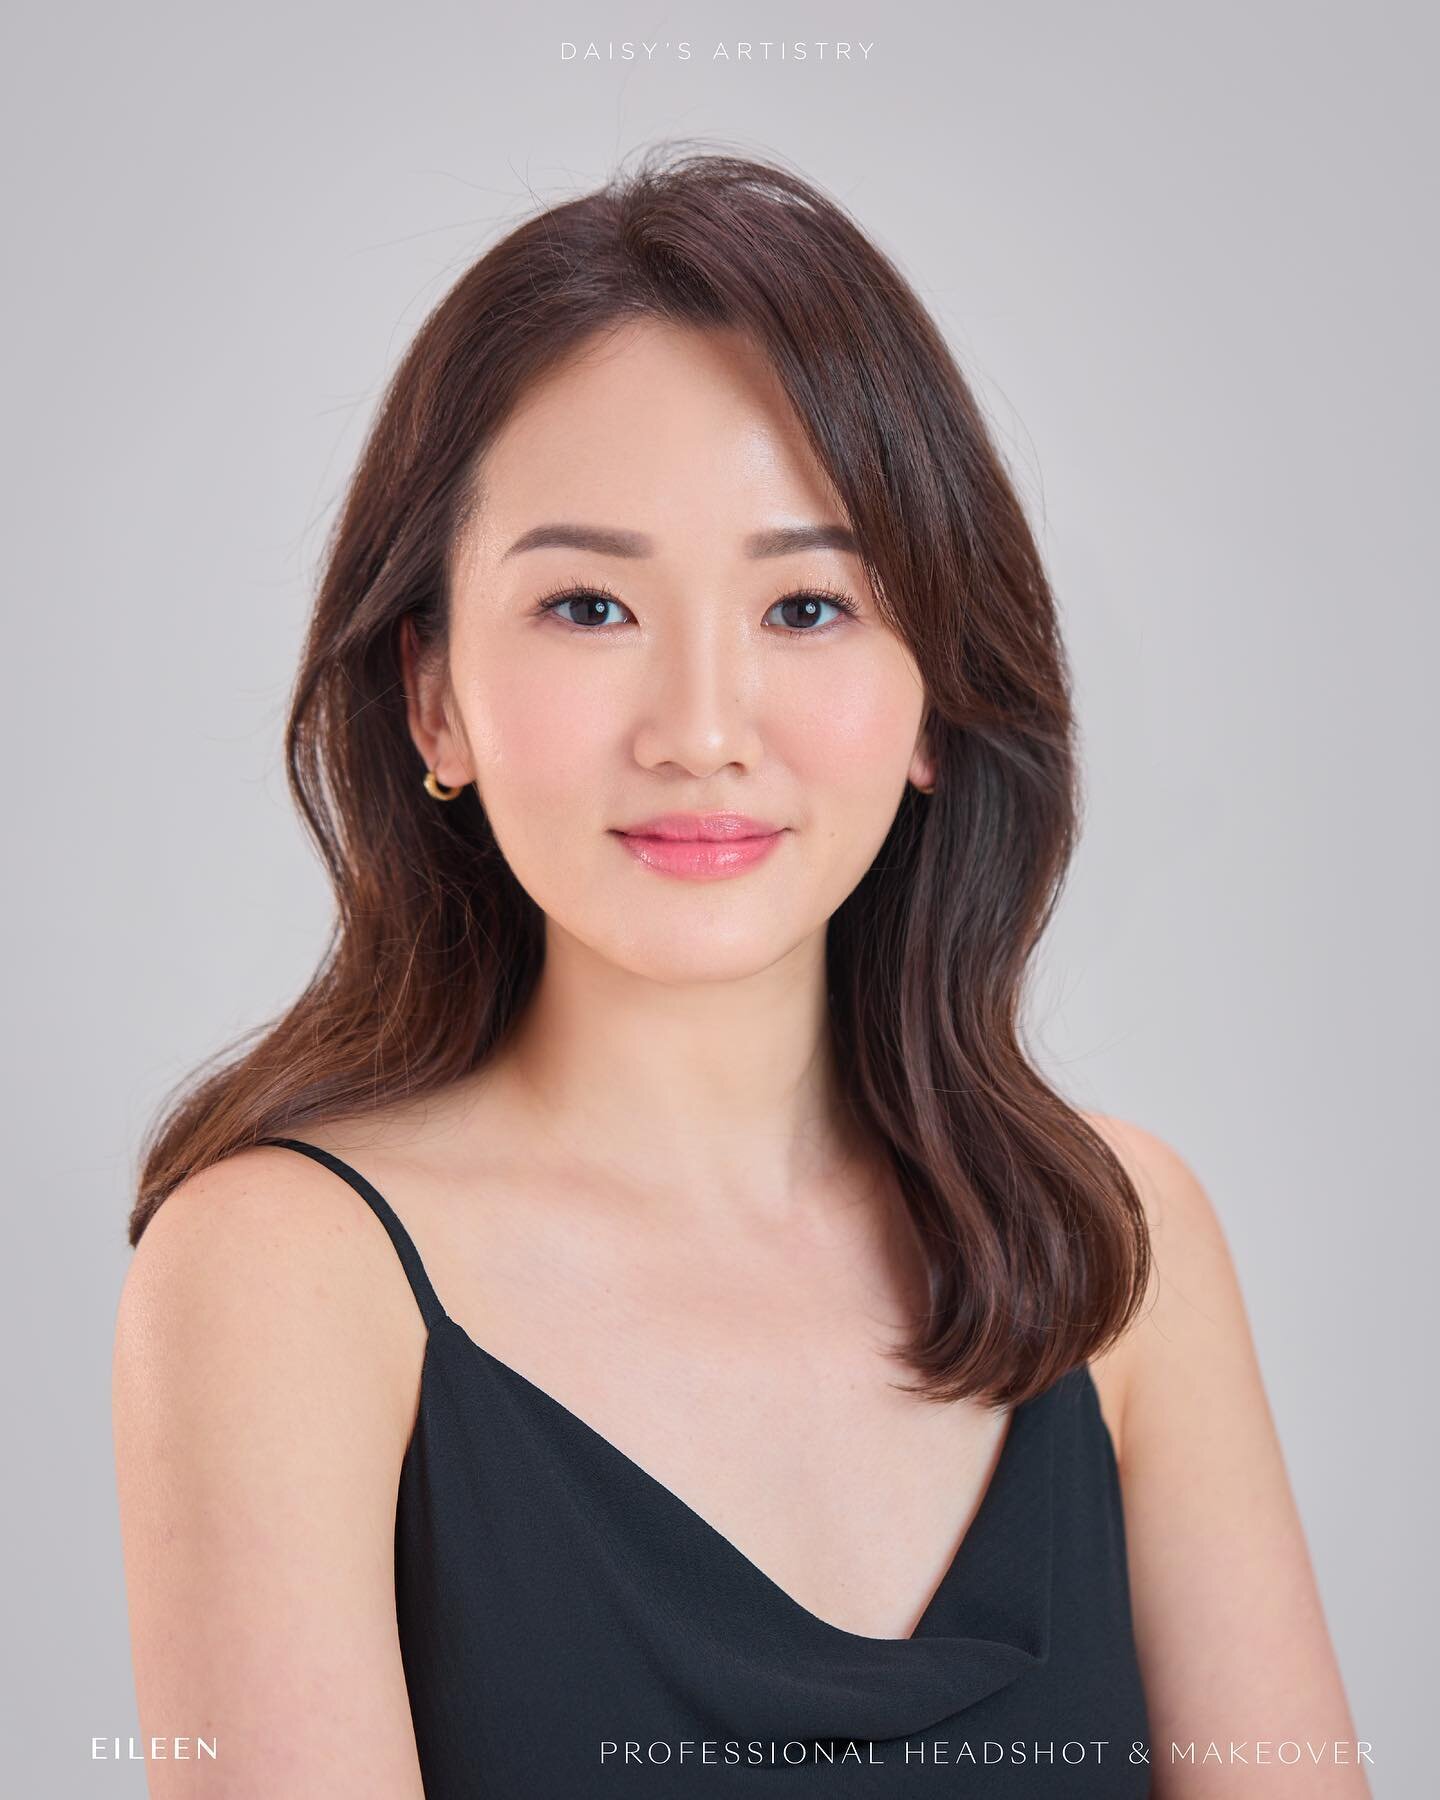 Eileen 🤍 Professional Headshot &amp; Makeover

Prepped her skin with the @bobbibrownsg enriched face base for a healthy glow after polishing her skin with toner.

I used a darker lip color in the beginning but changed it to the @diorbeauty &ldquo;pa